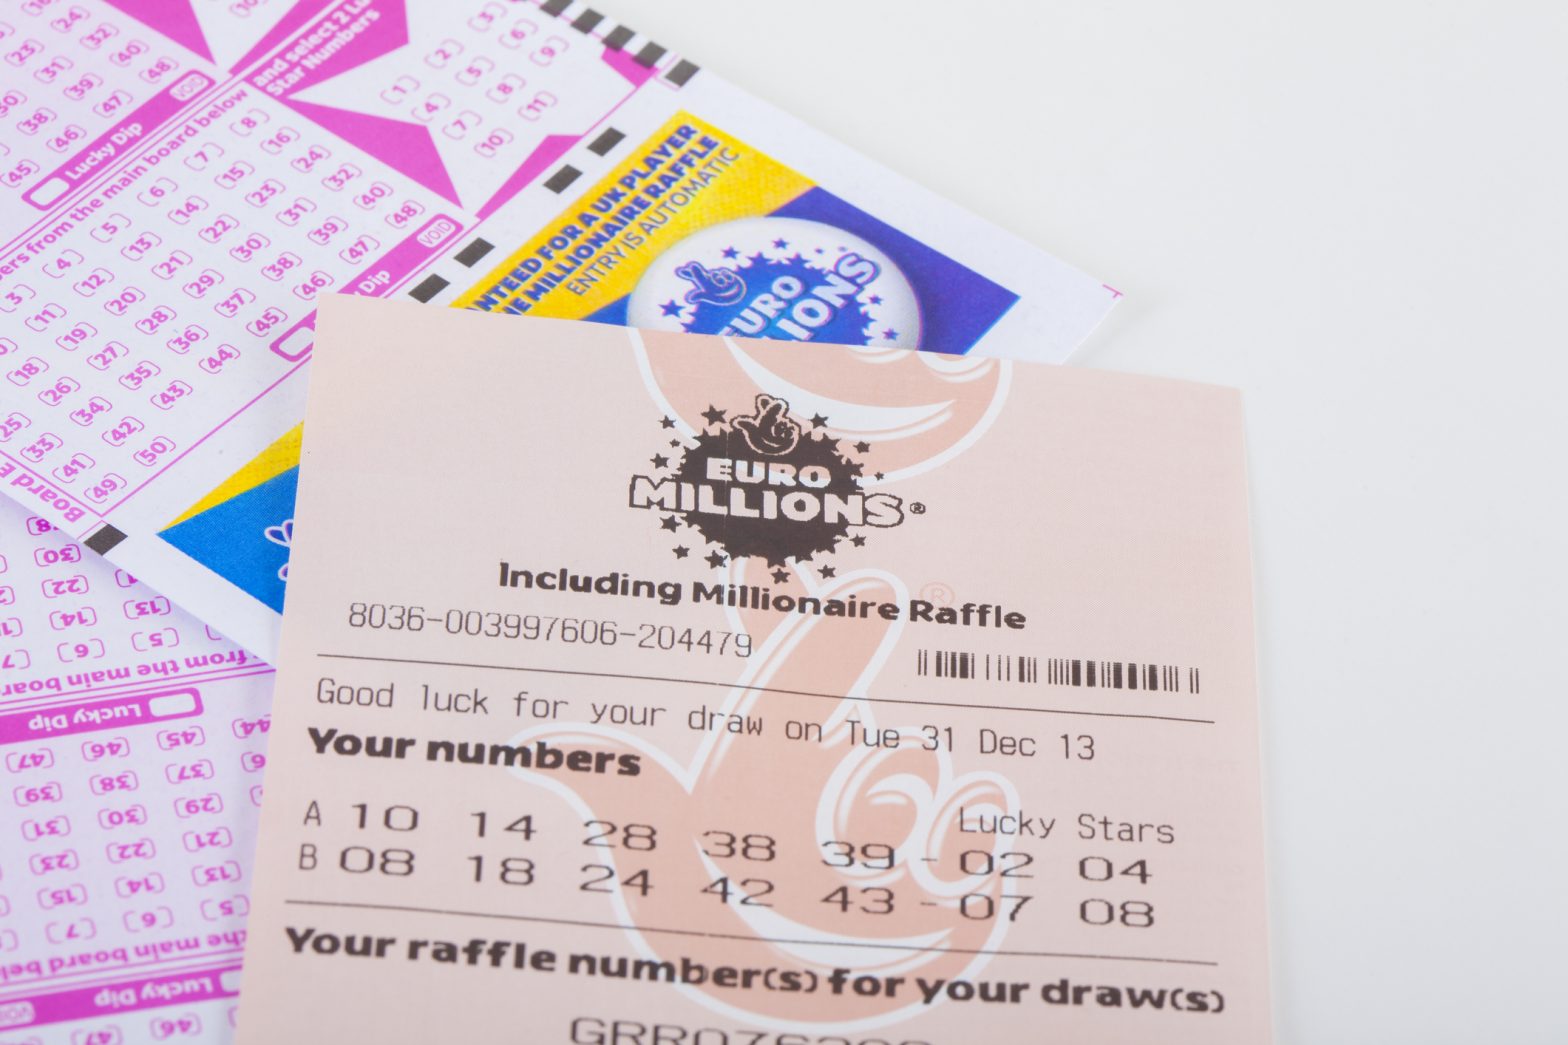 EuroMillions unclaimed lottery ticket